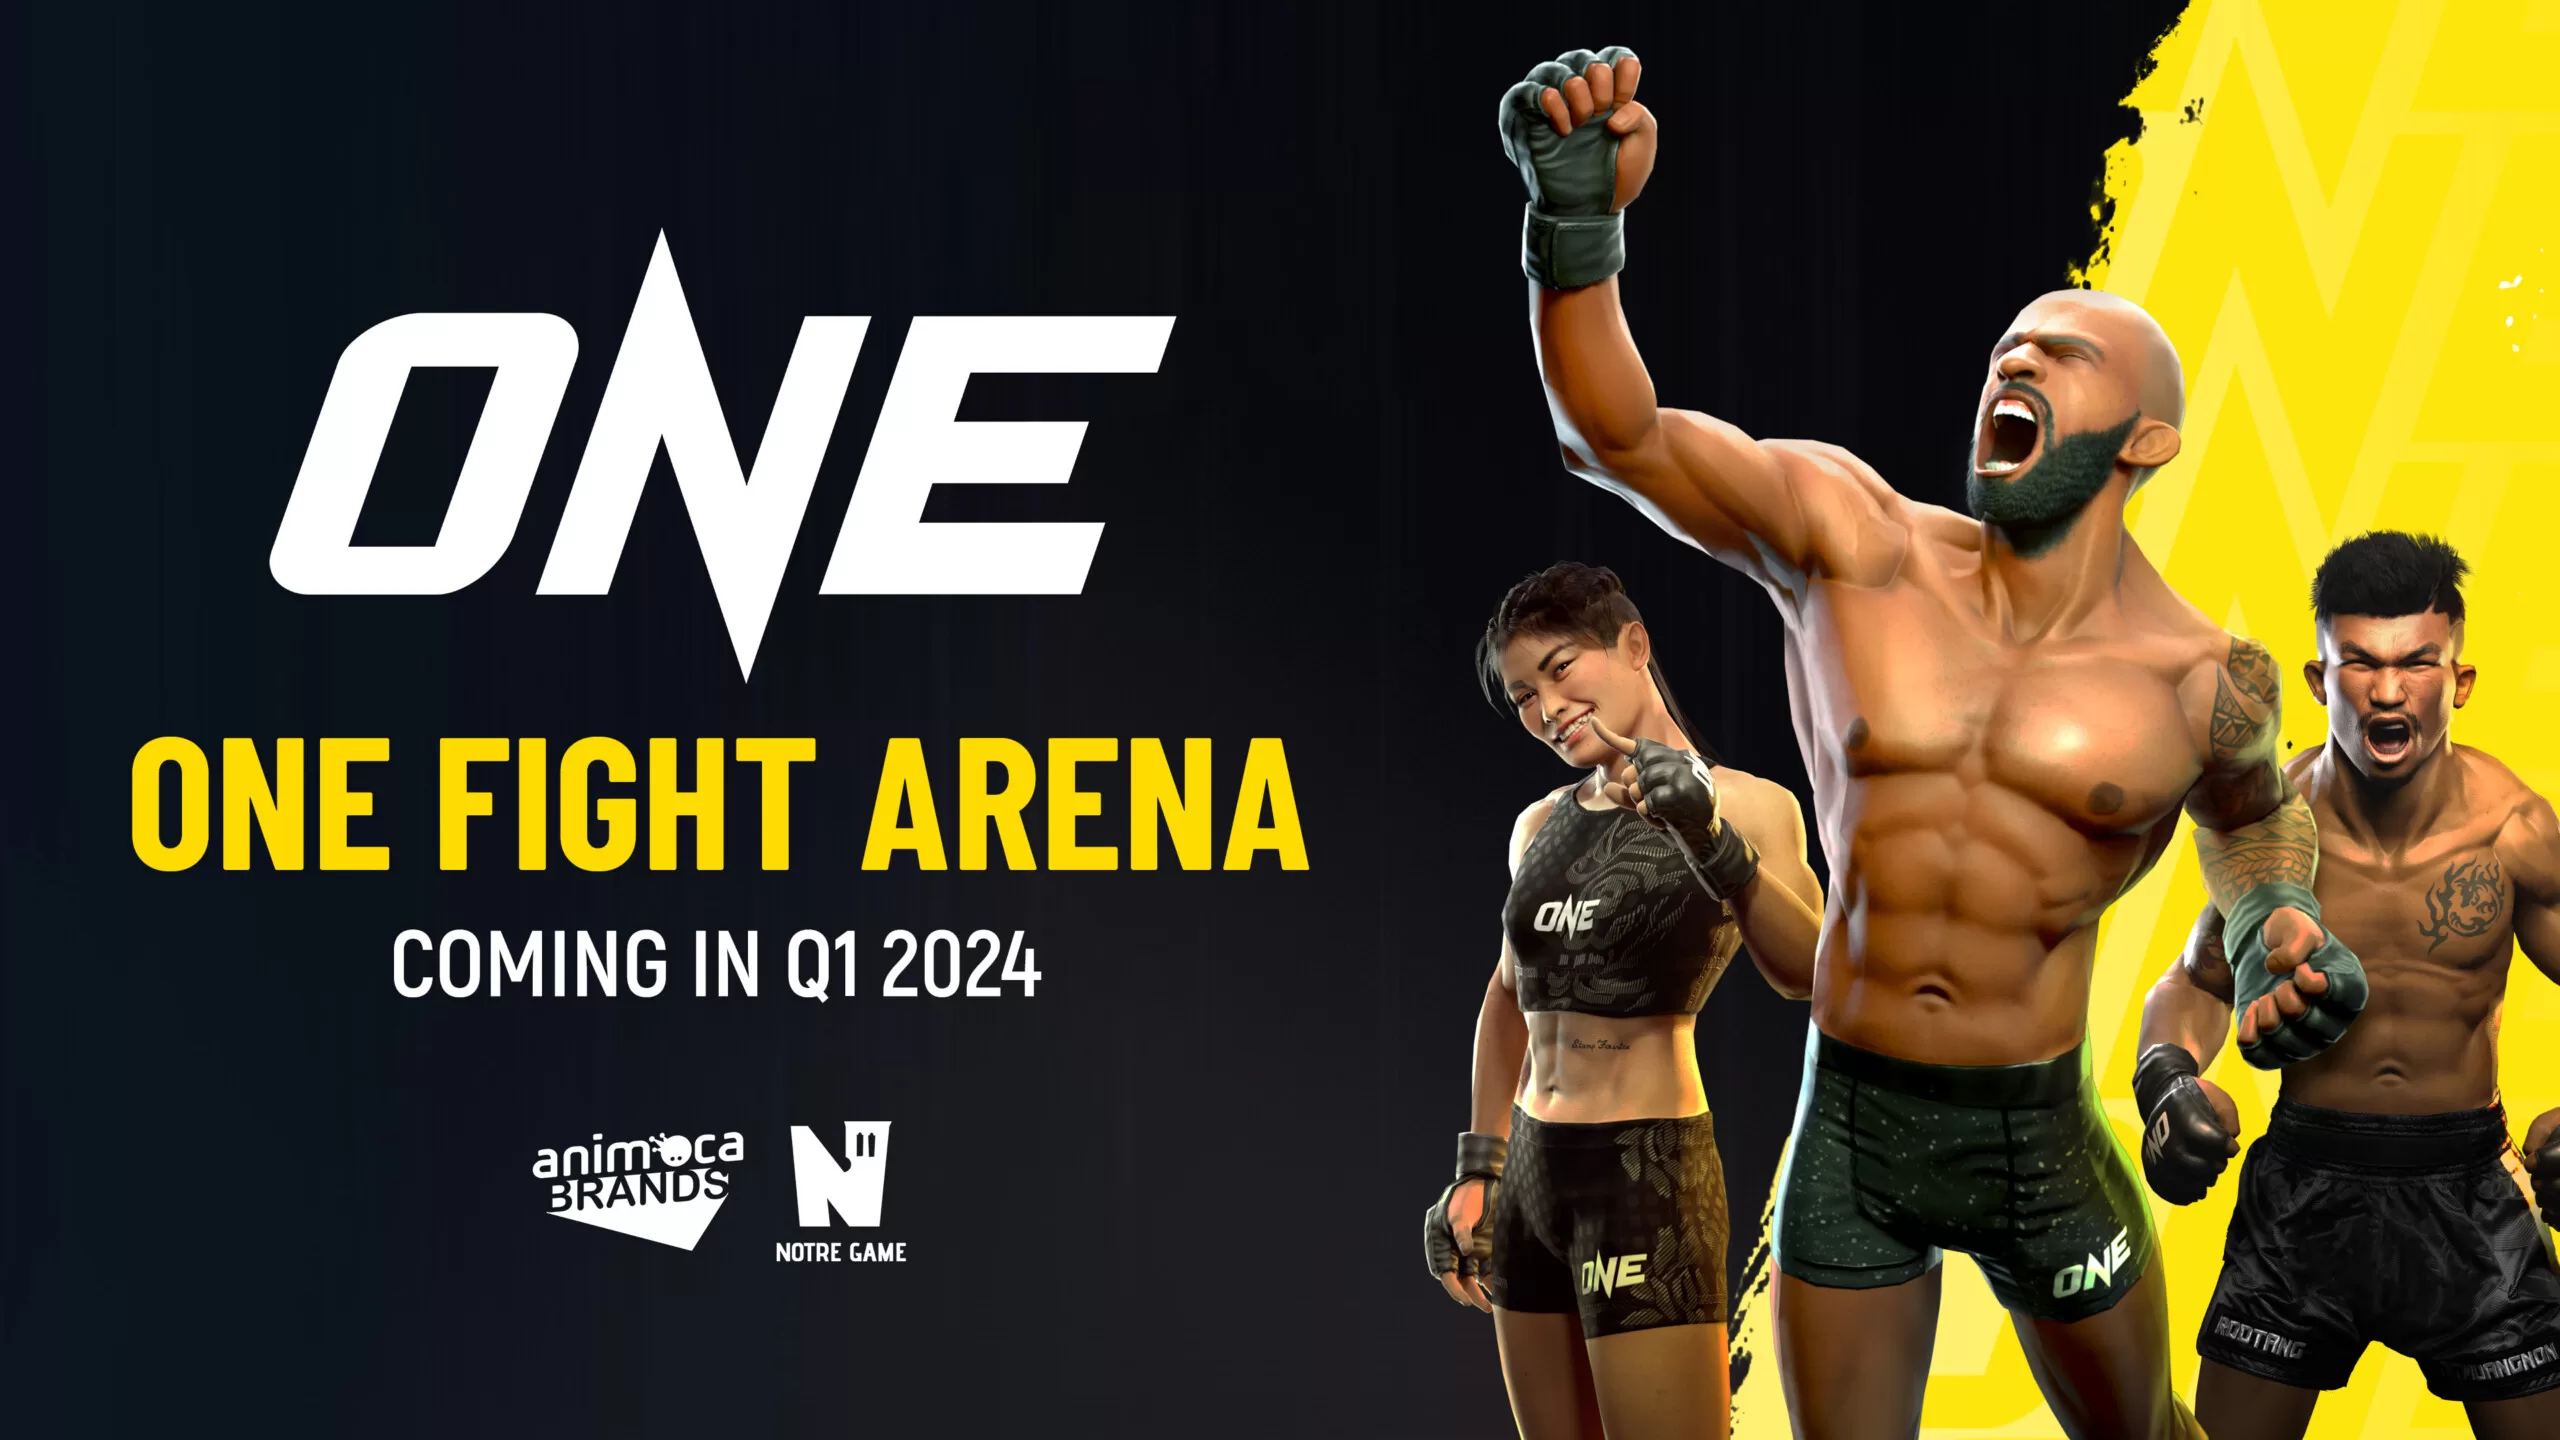 ONE FIGHT ARENA